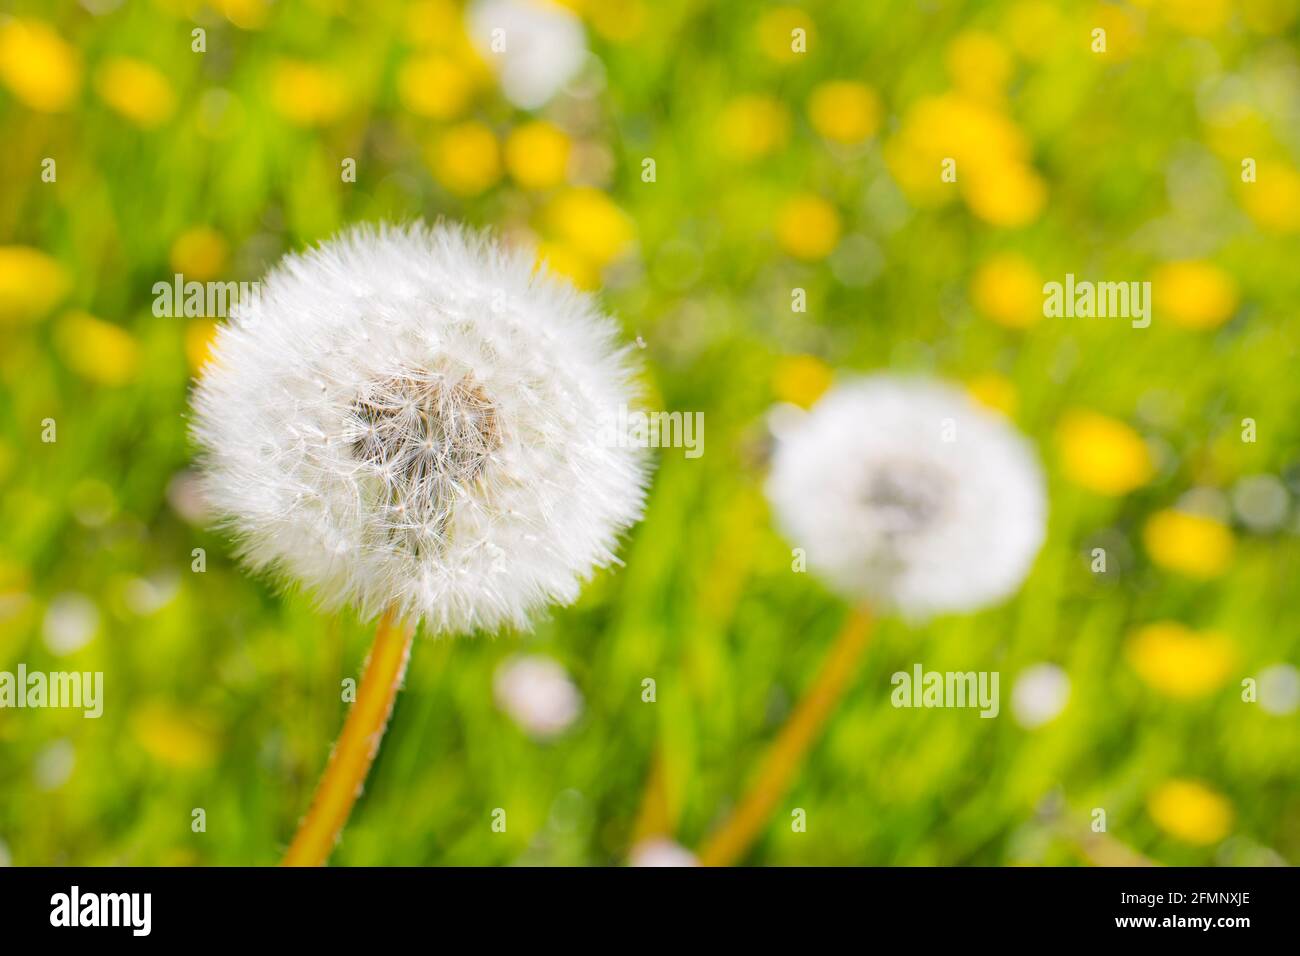 Close-up of a dandelion in a green meadow with yellow blossoms - selective focus Stock Photo